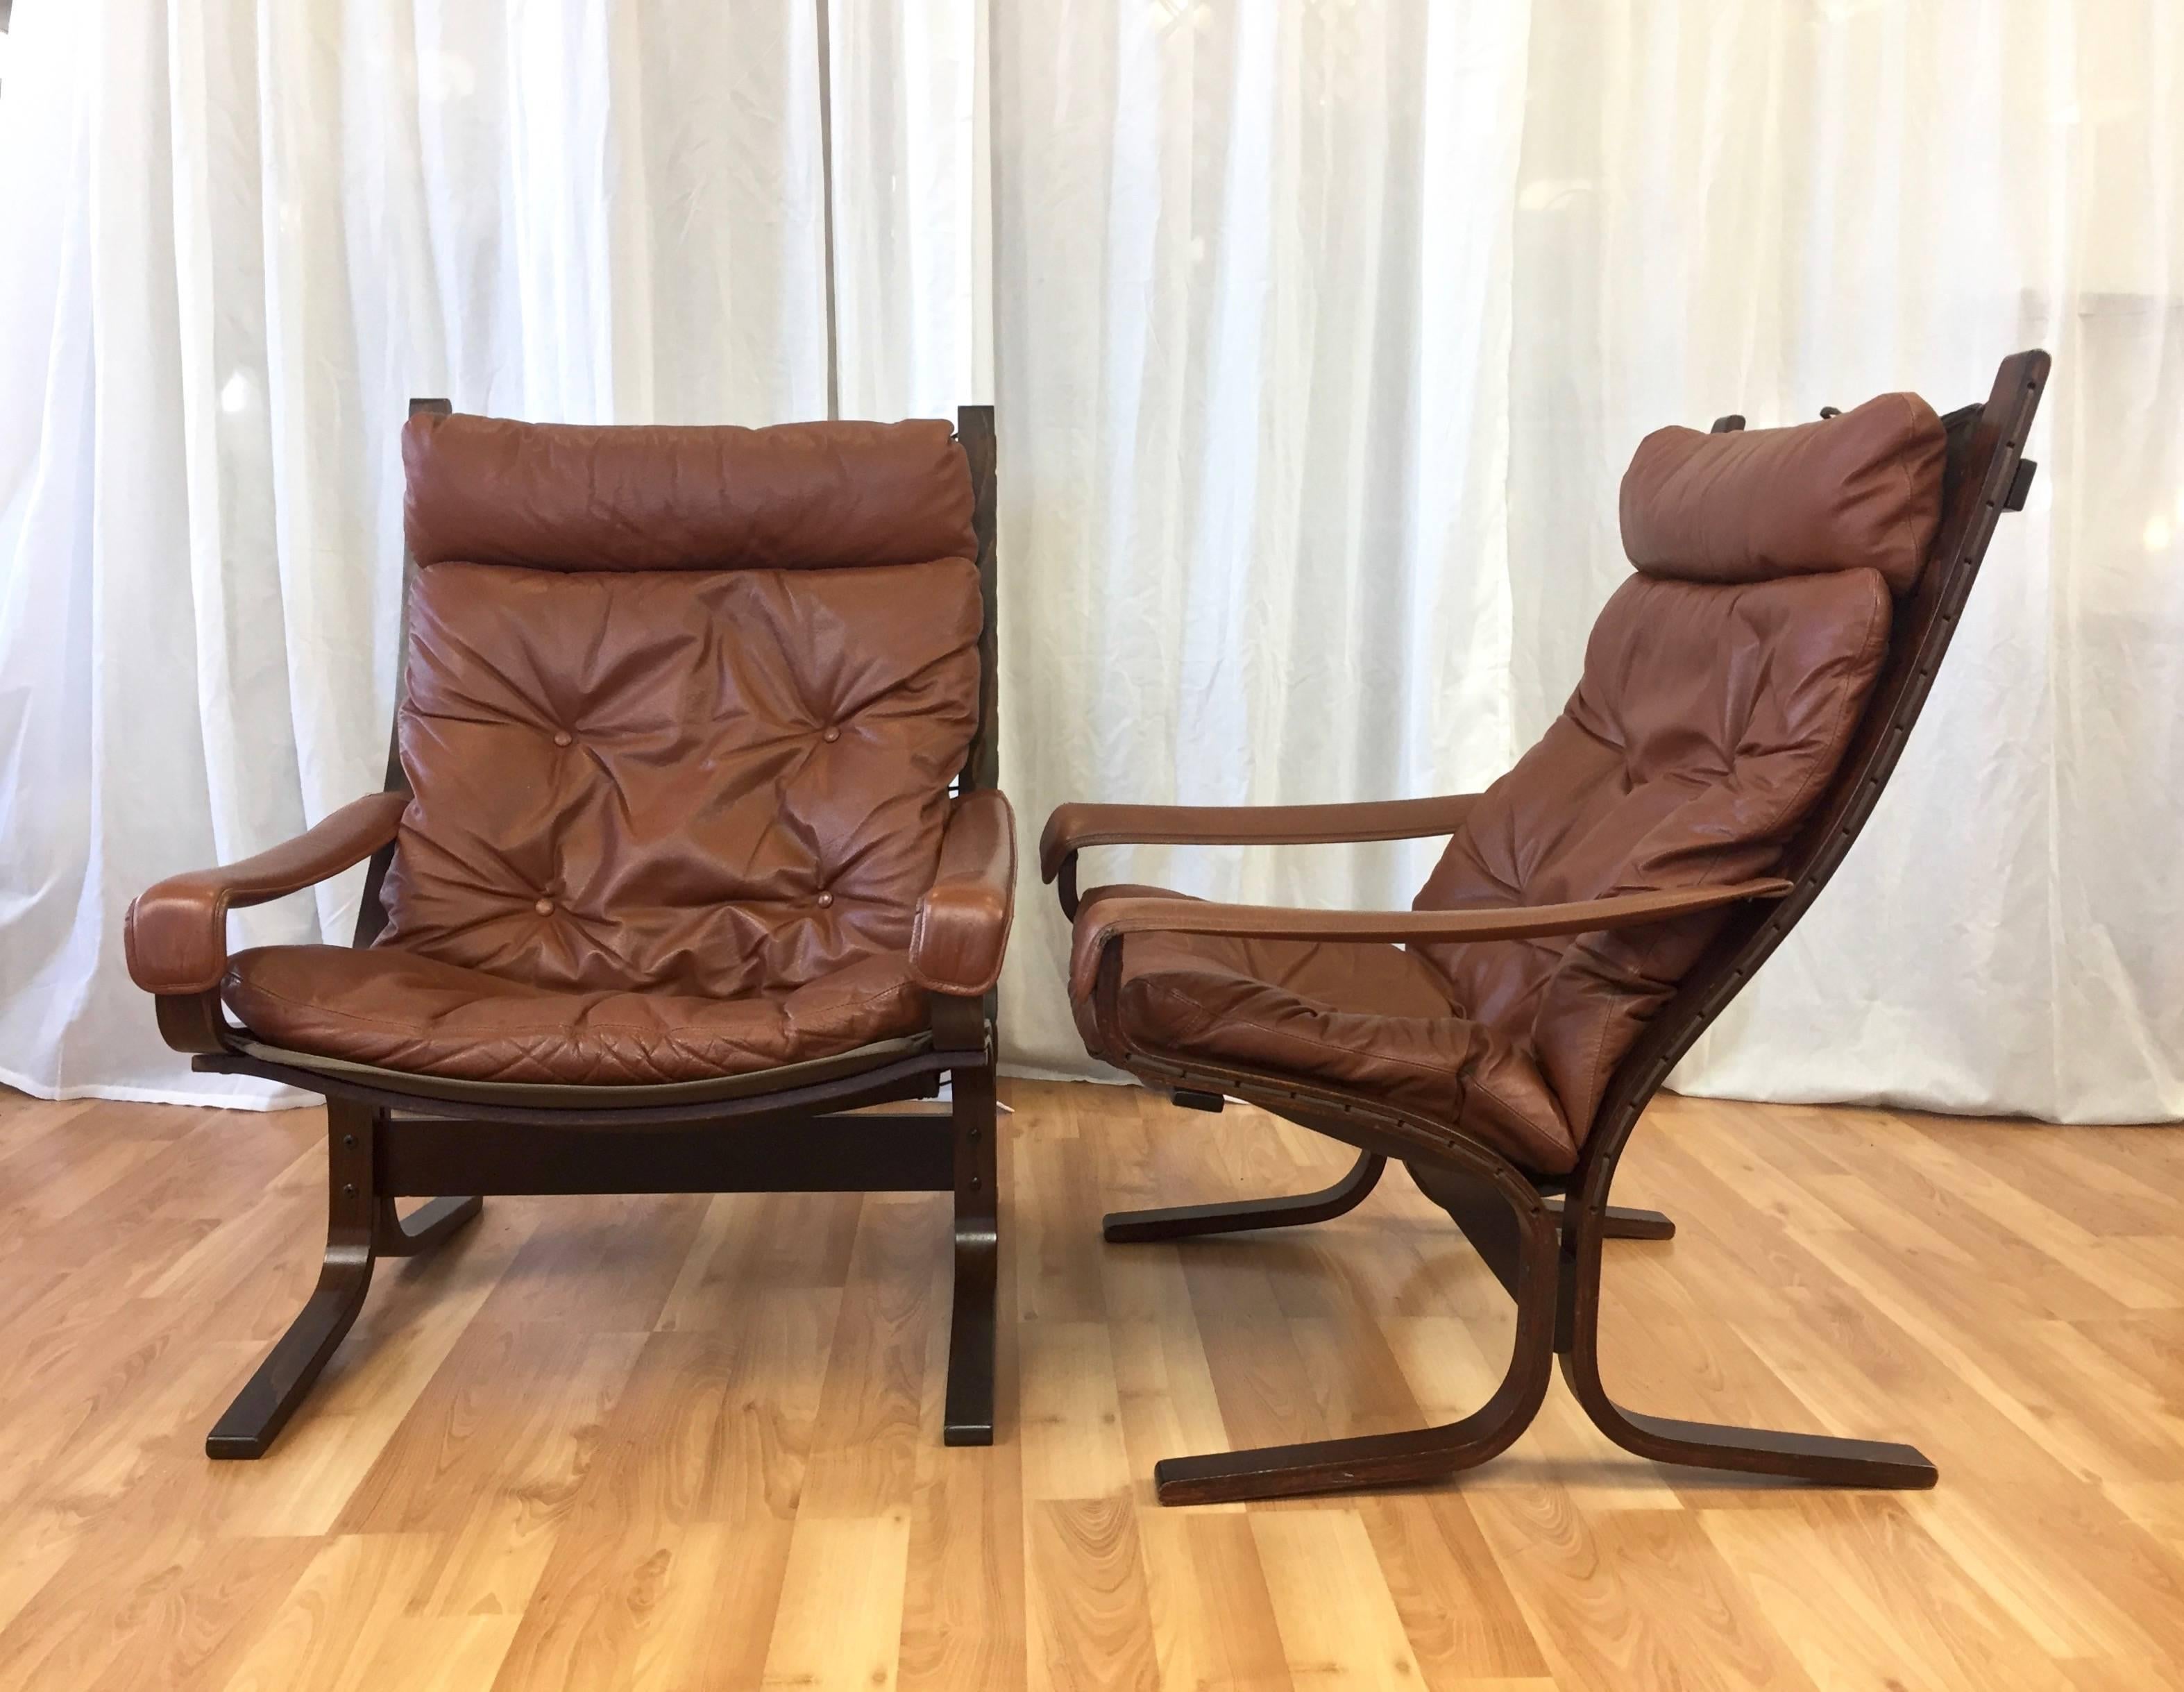 A pair of Westnofa “Siesta” bentwood leather lounge chairs by Ingmar Relling.

A Scandinavian Classic that owes its enduring popularity and collectability to Relling’s aesthetically influential, exceptionally ergonomic design. Curvaceous